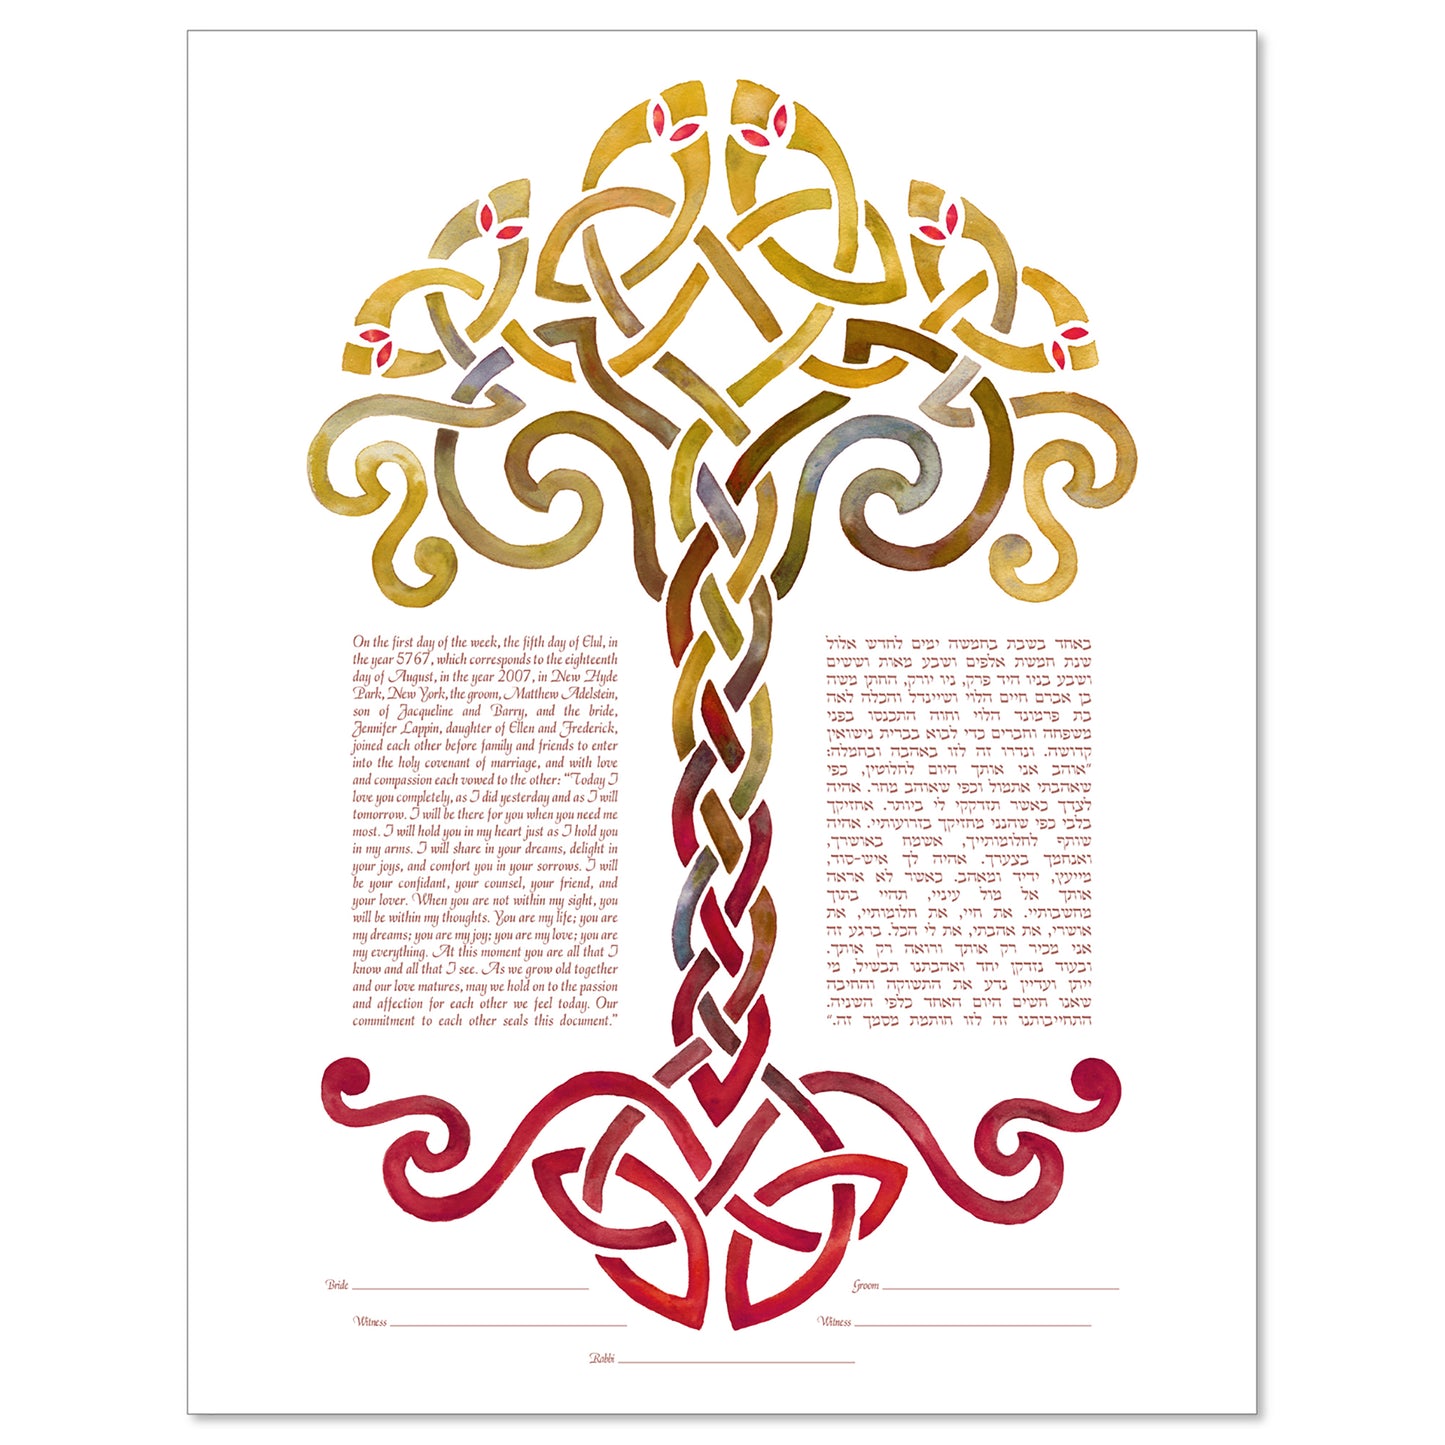 Woven Tree of Life Autumn ketubah by Claire Carter in gold and red on white using Celtic and Jewish symbolism.